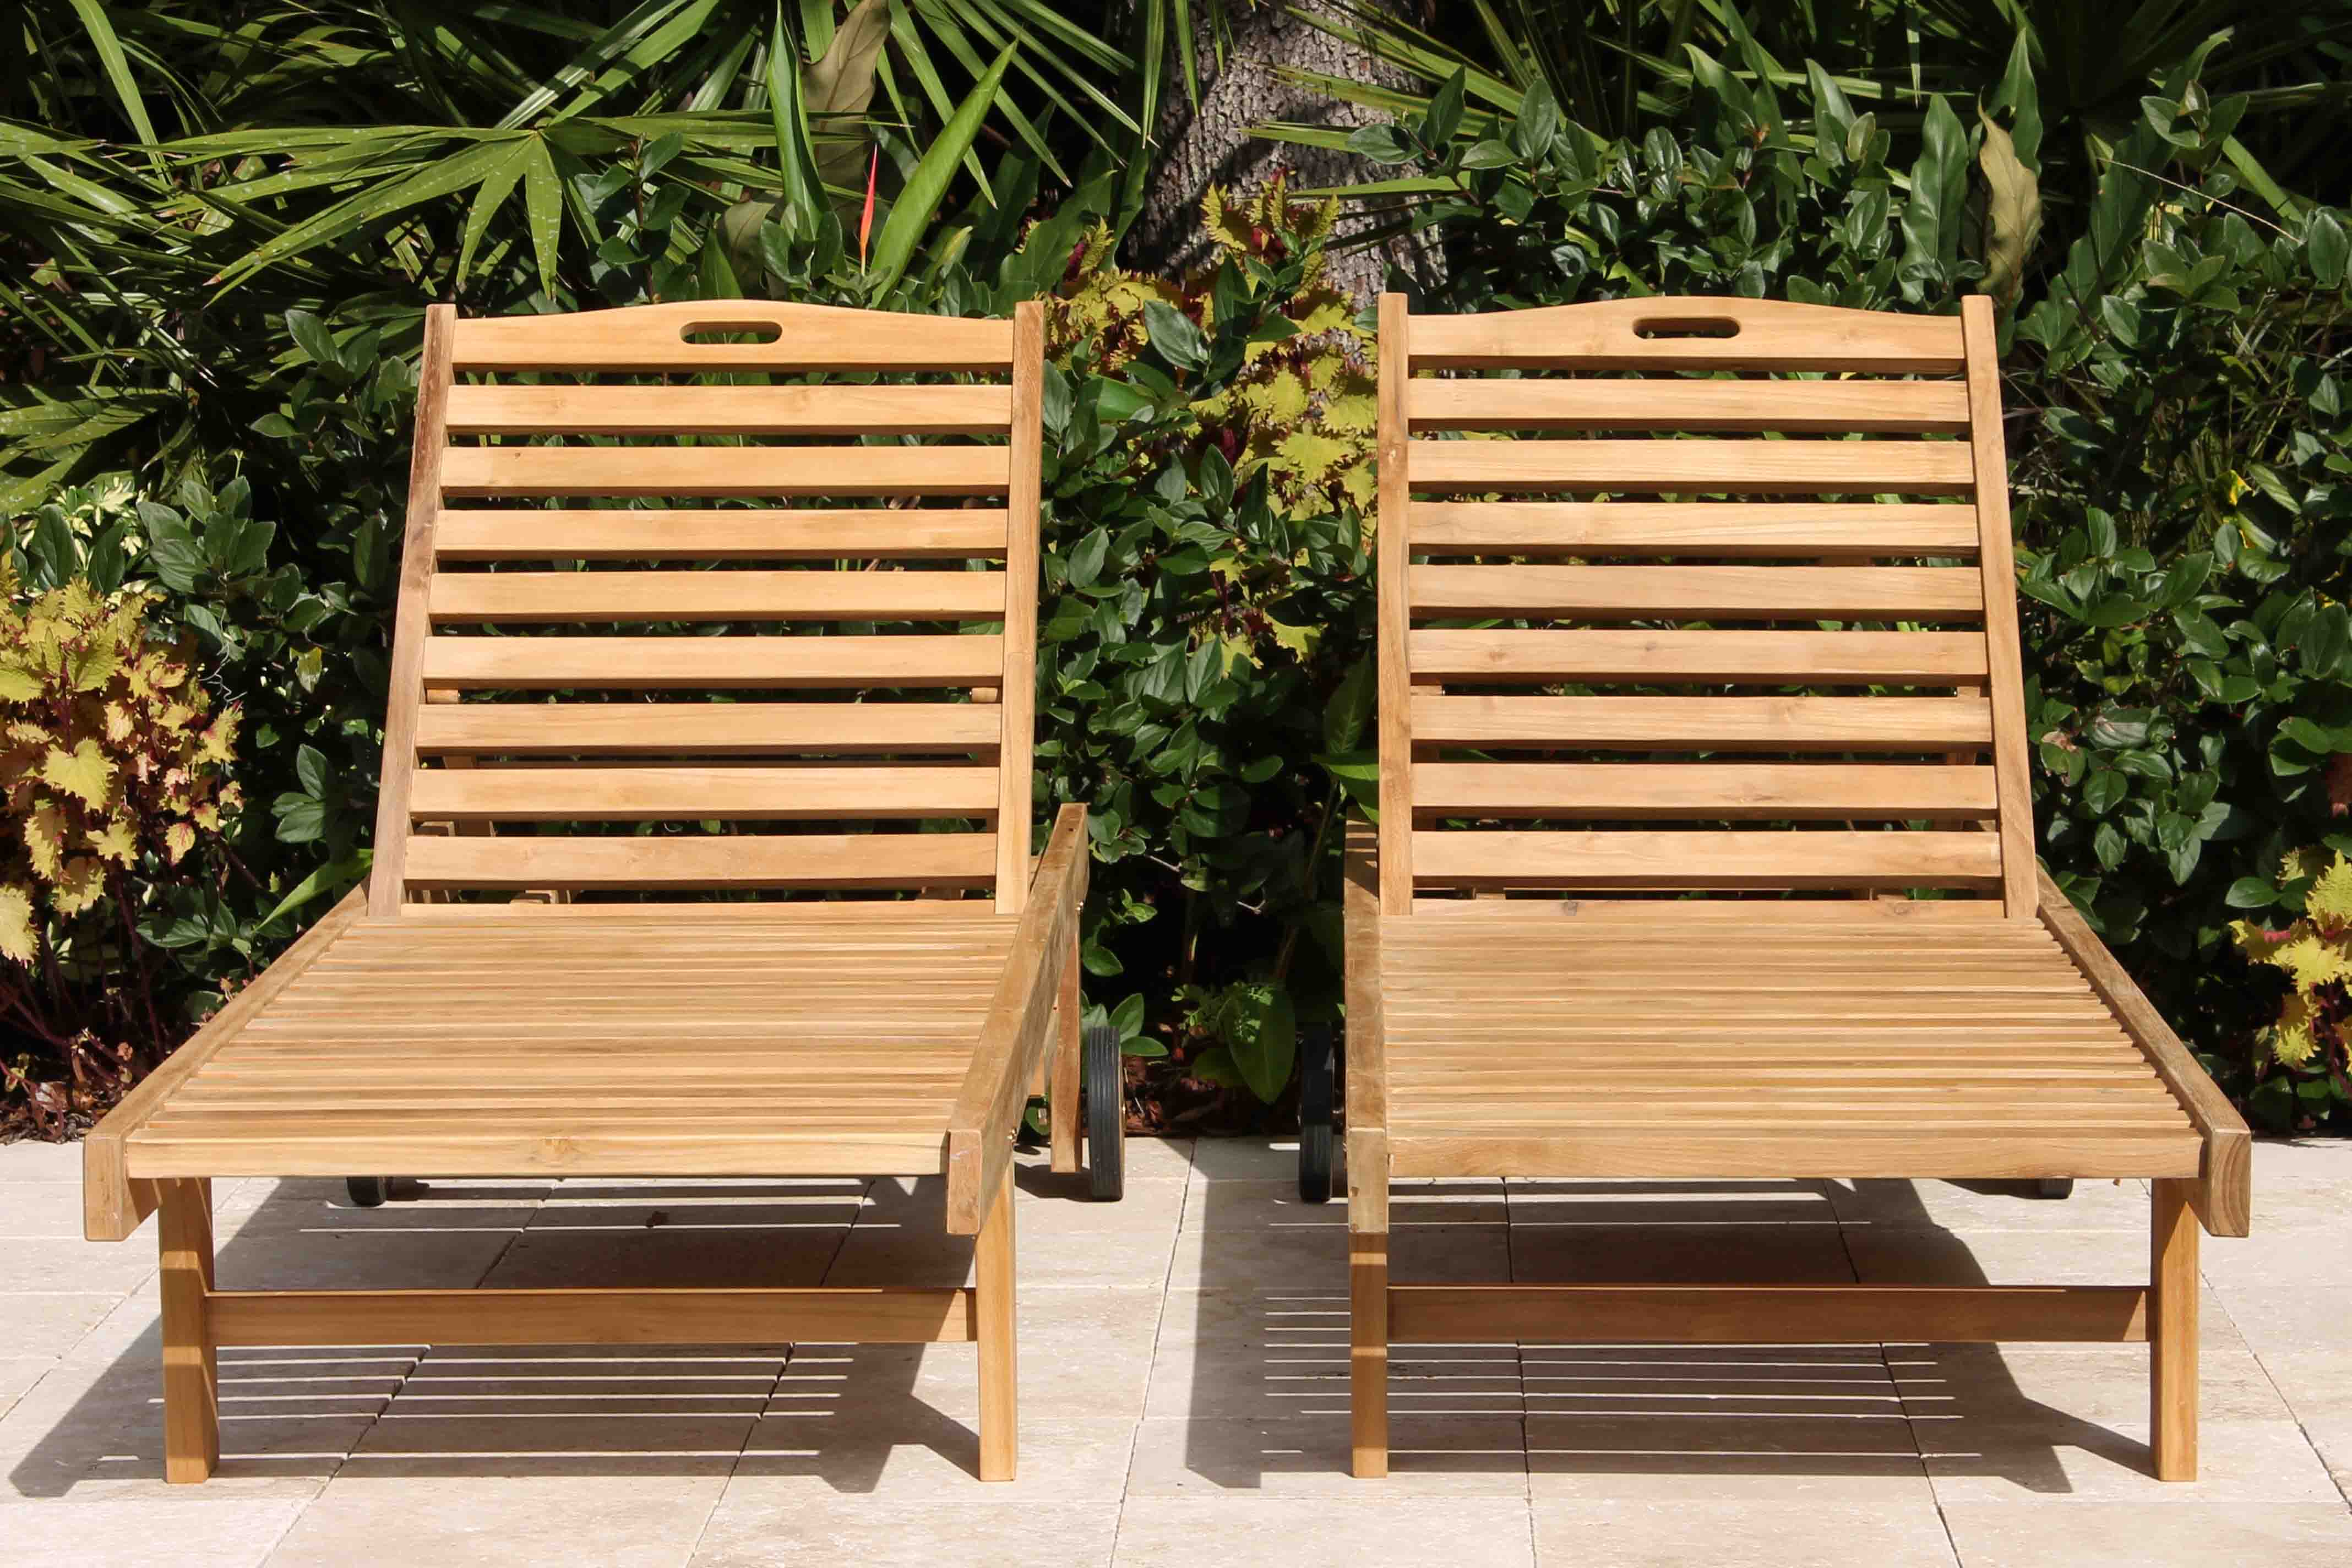 Why Teak? Top 5 Reasons To Choose Teak Furniture For Your Home